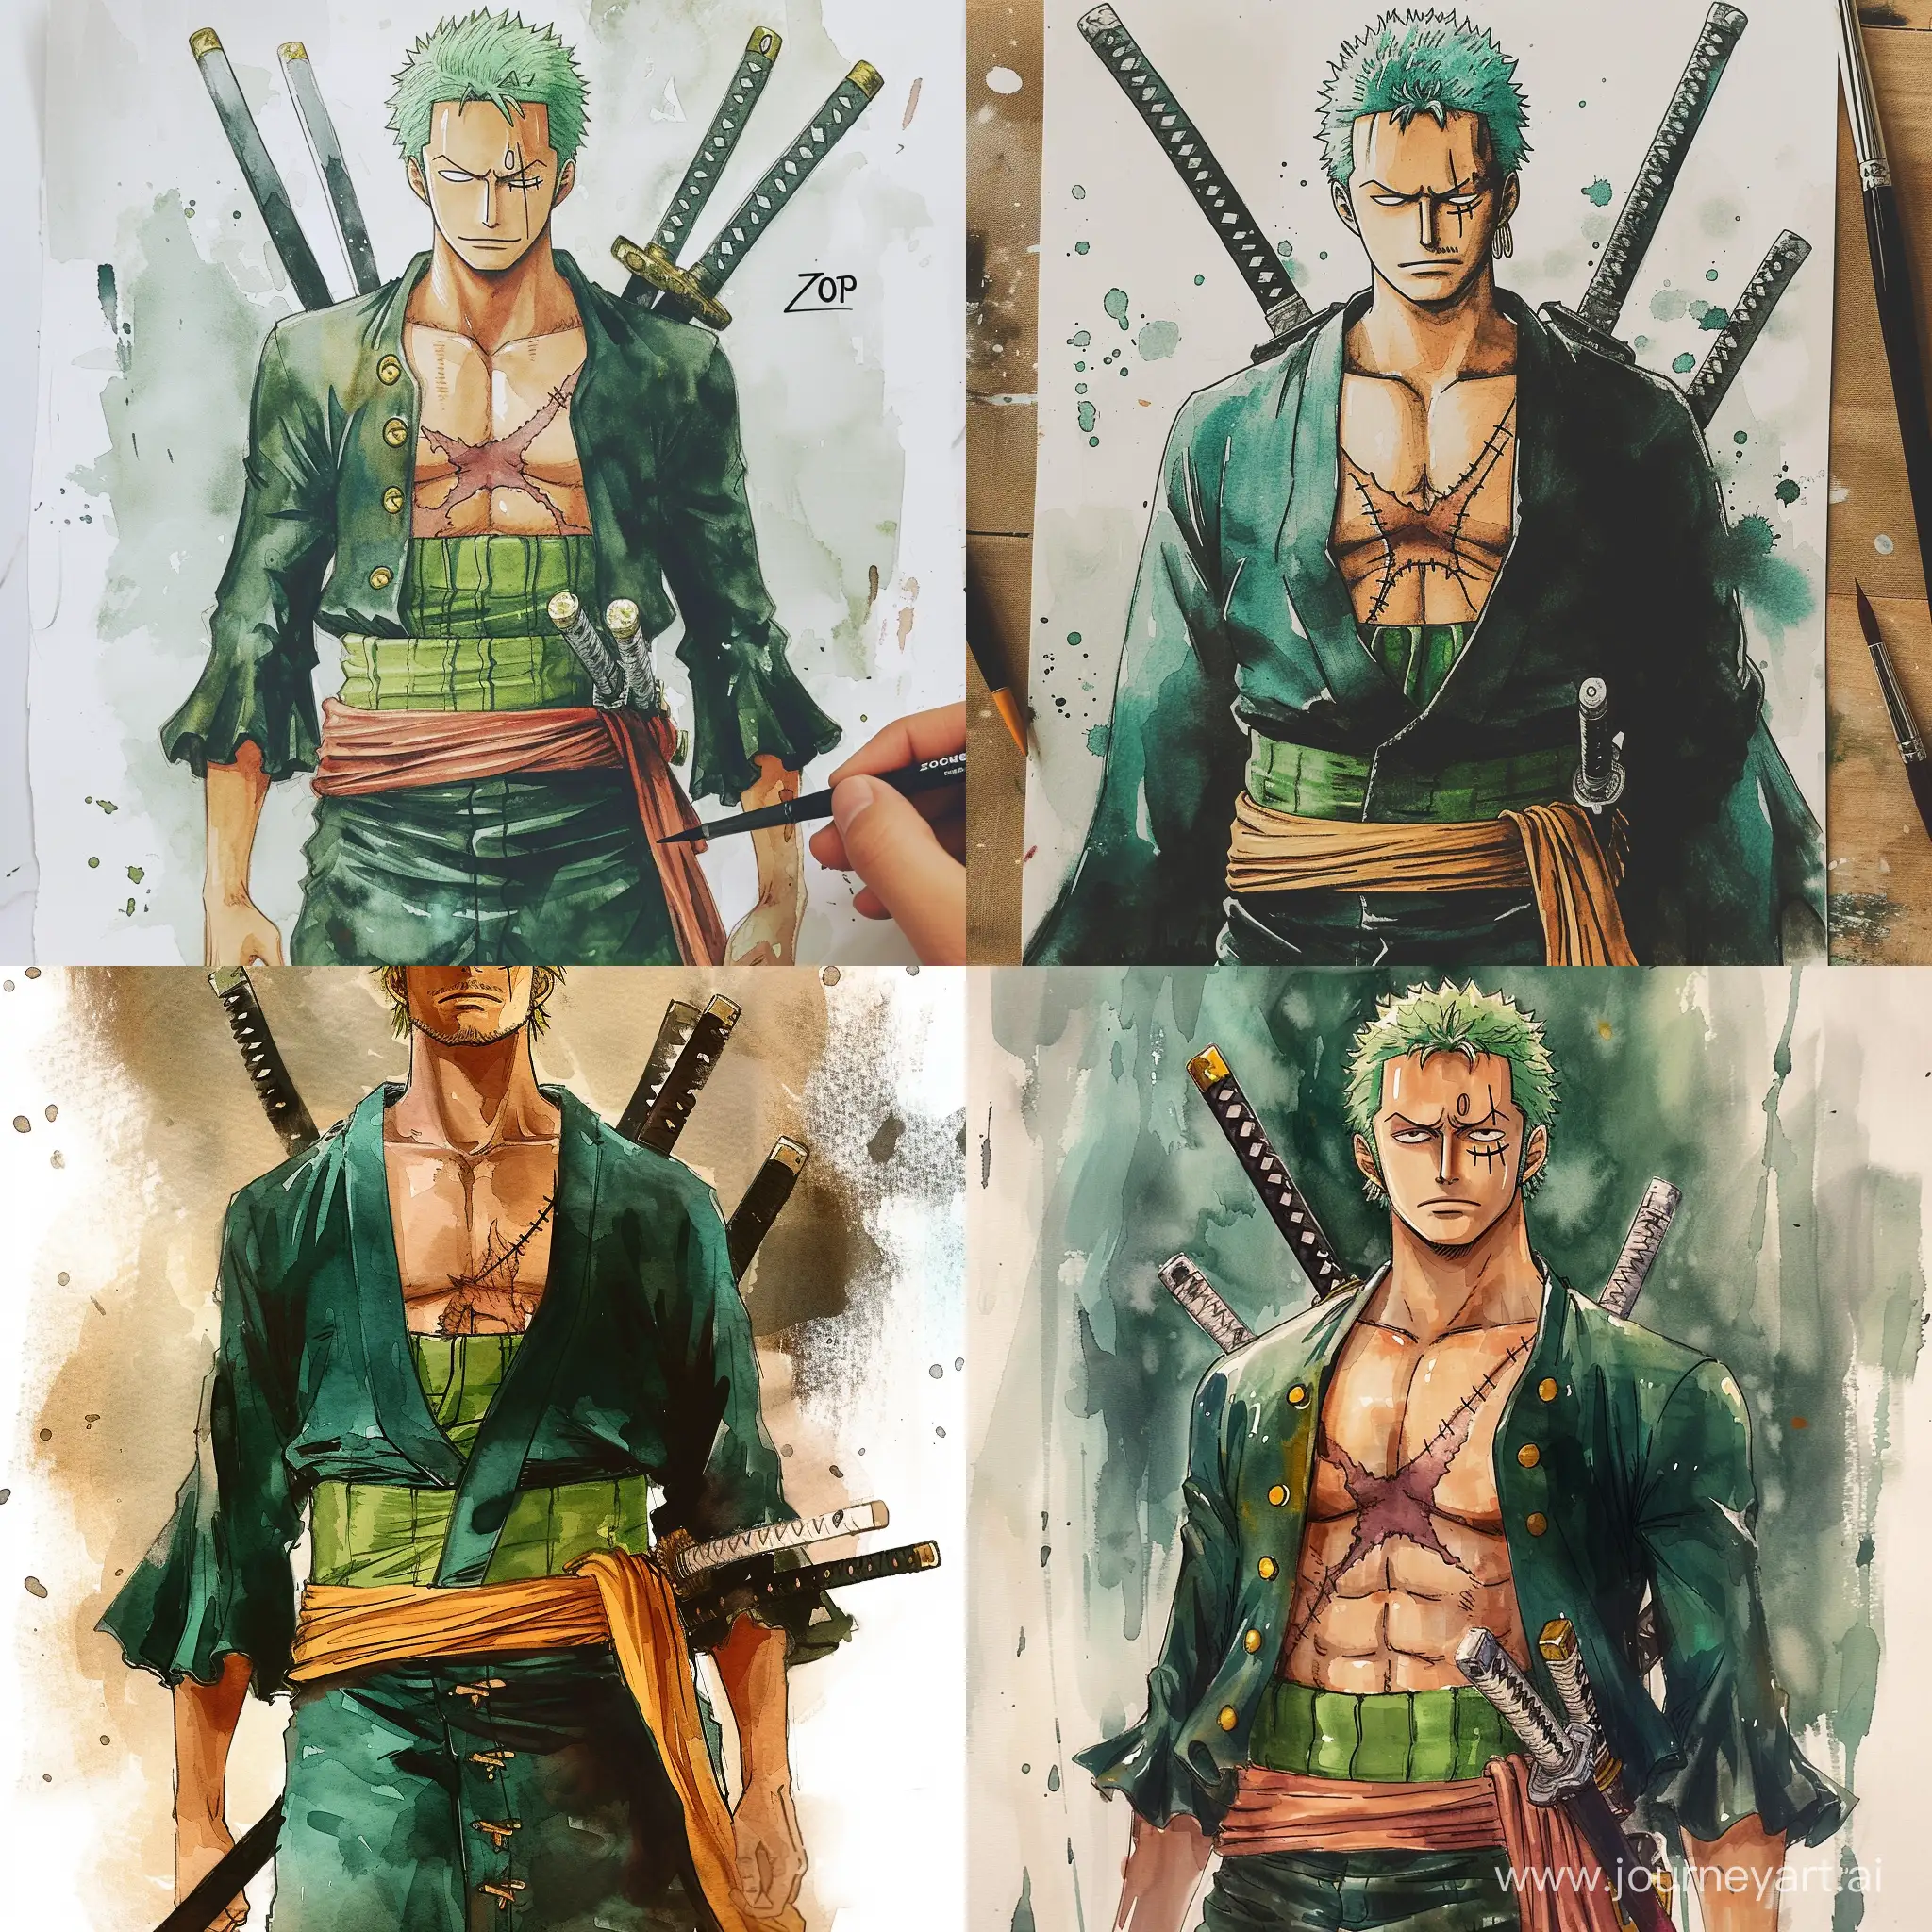 Character zoro.anime one piece.draw with hand.water color.cold.three sword in belt.